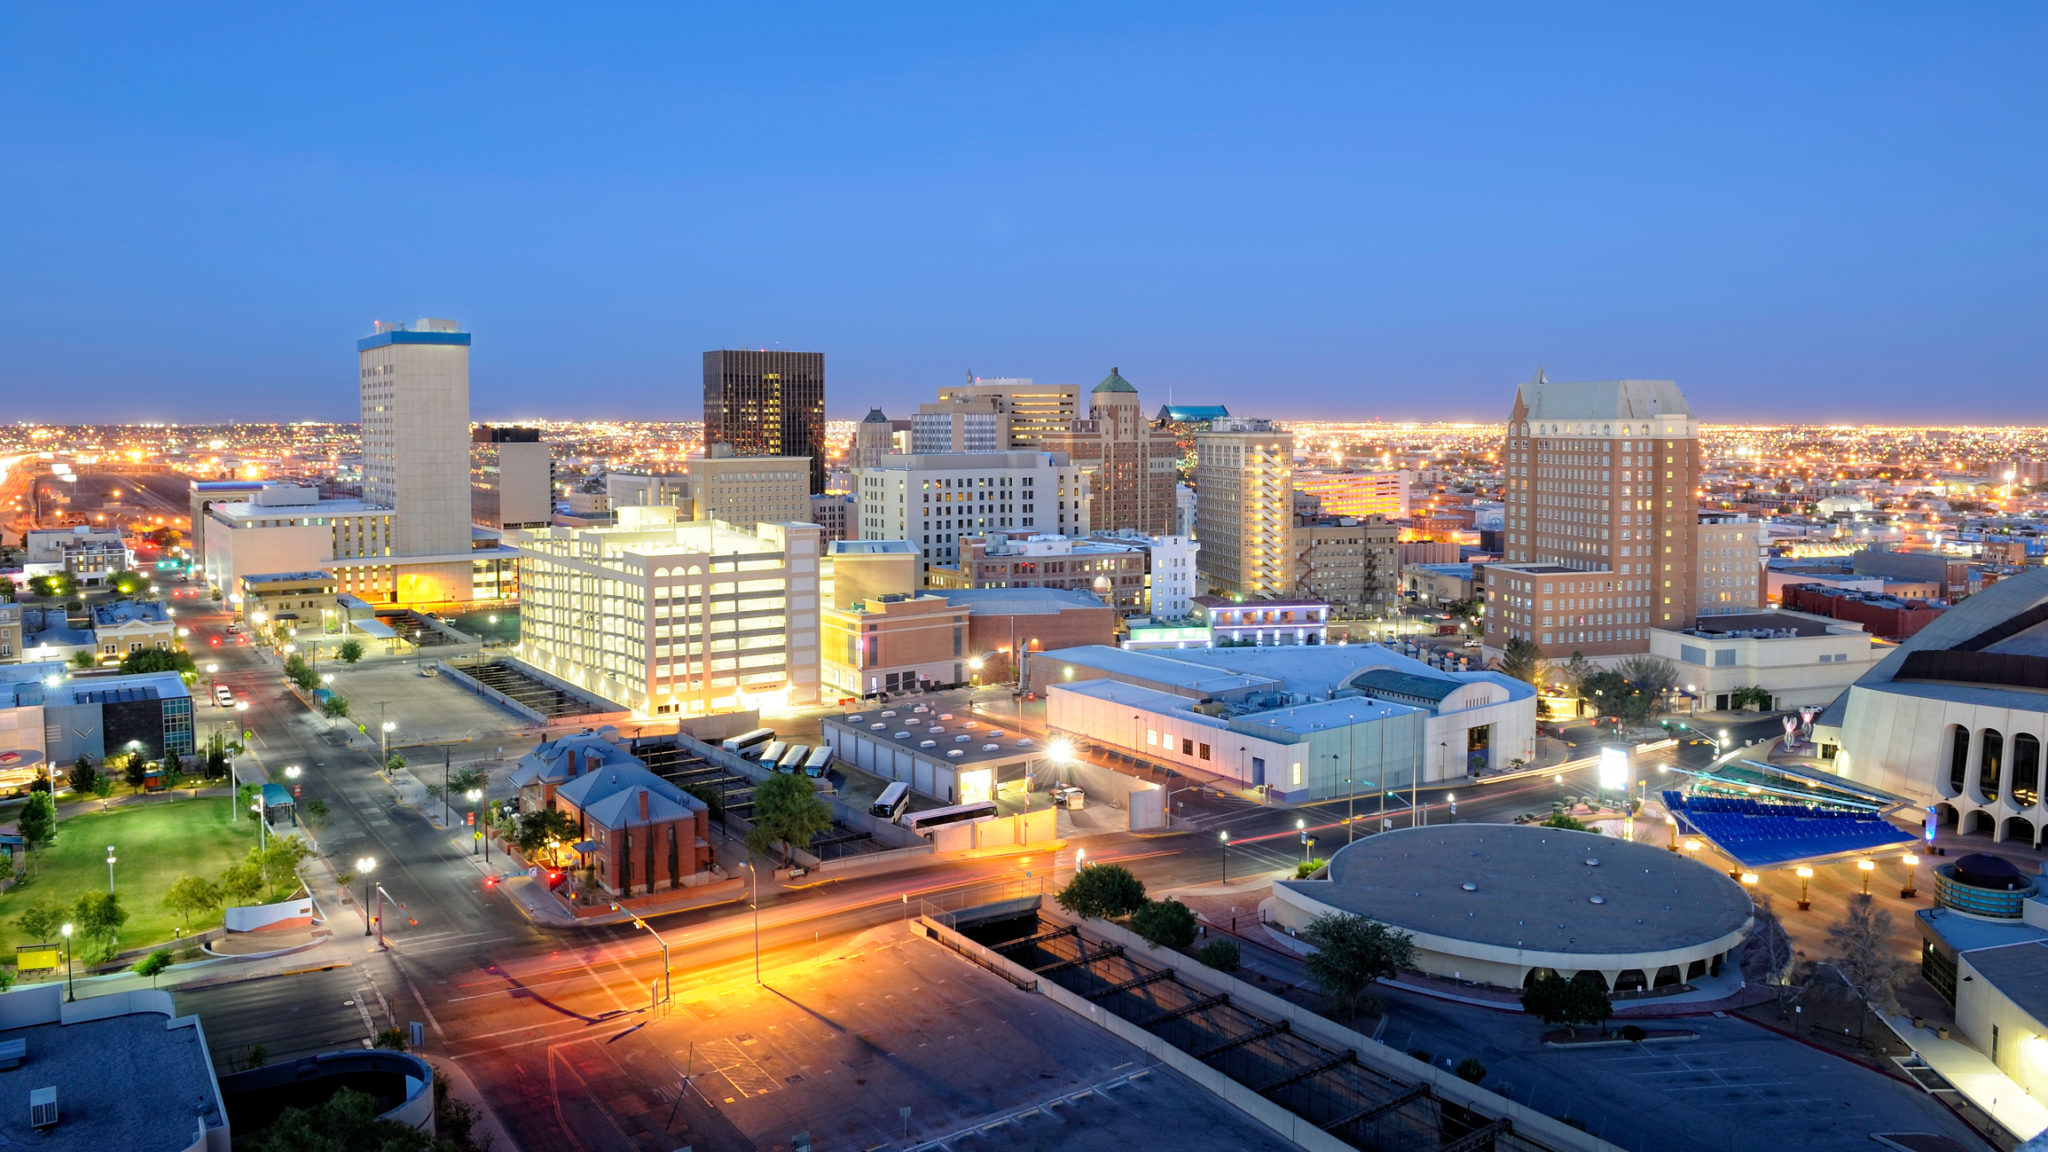 Downtown El Paso Texas skyline seen just after sunset. 16 x 9 aspect ratio. Space for copy.